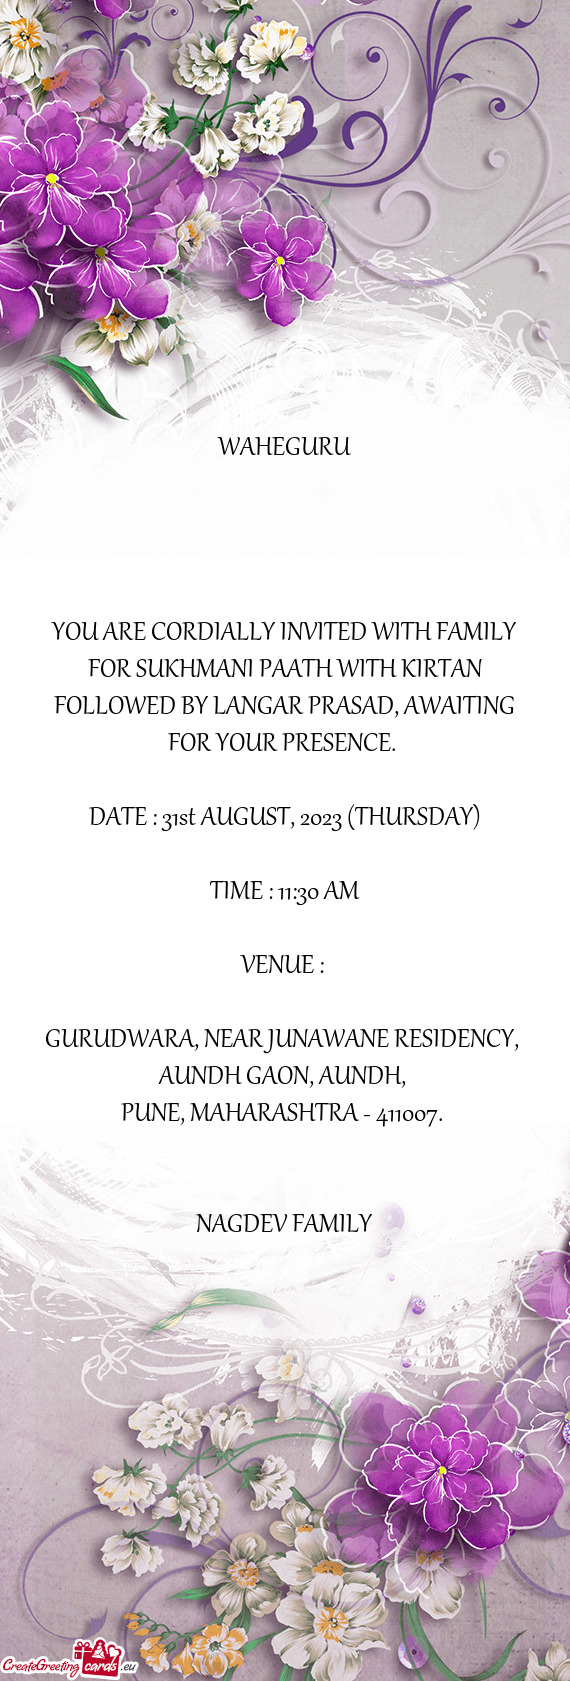 FOR SUKHMANI PAATH WITH KIRTAN